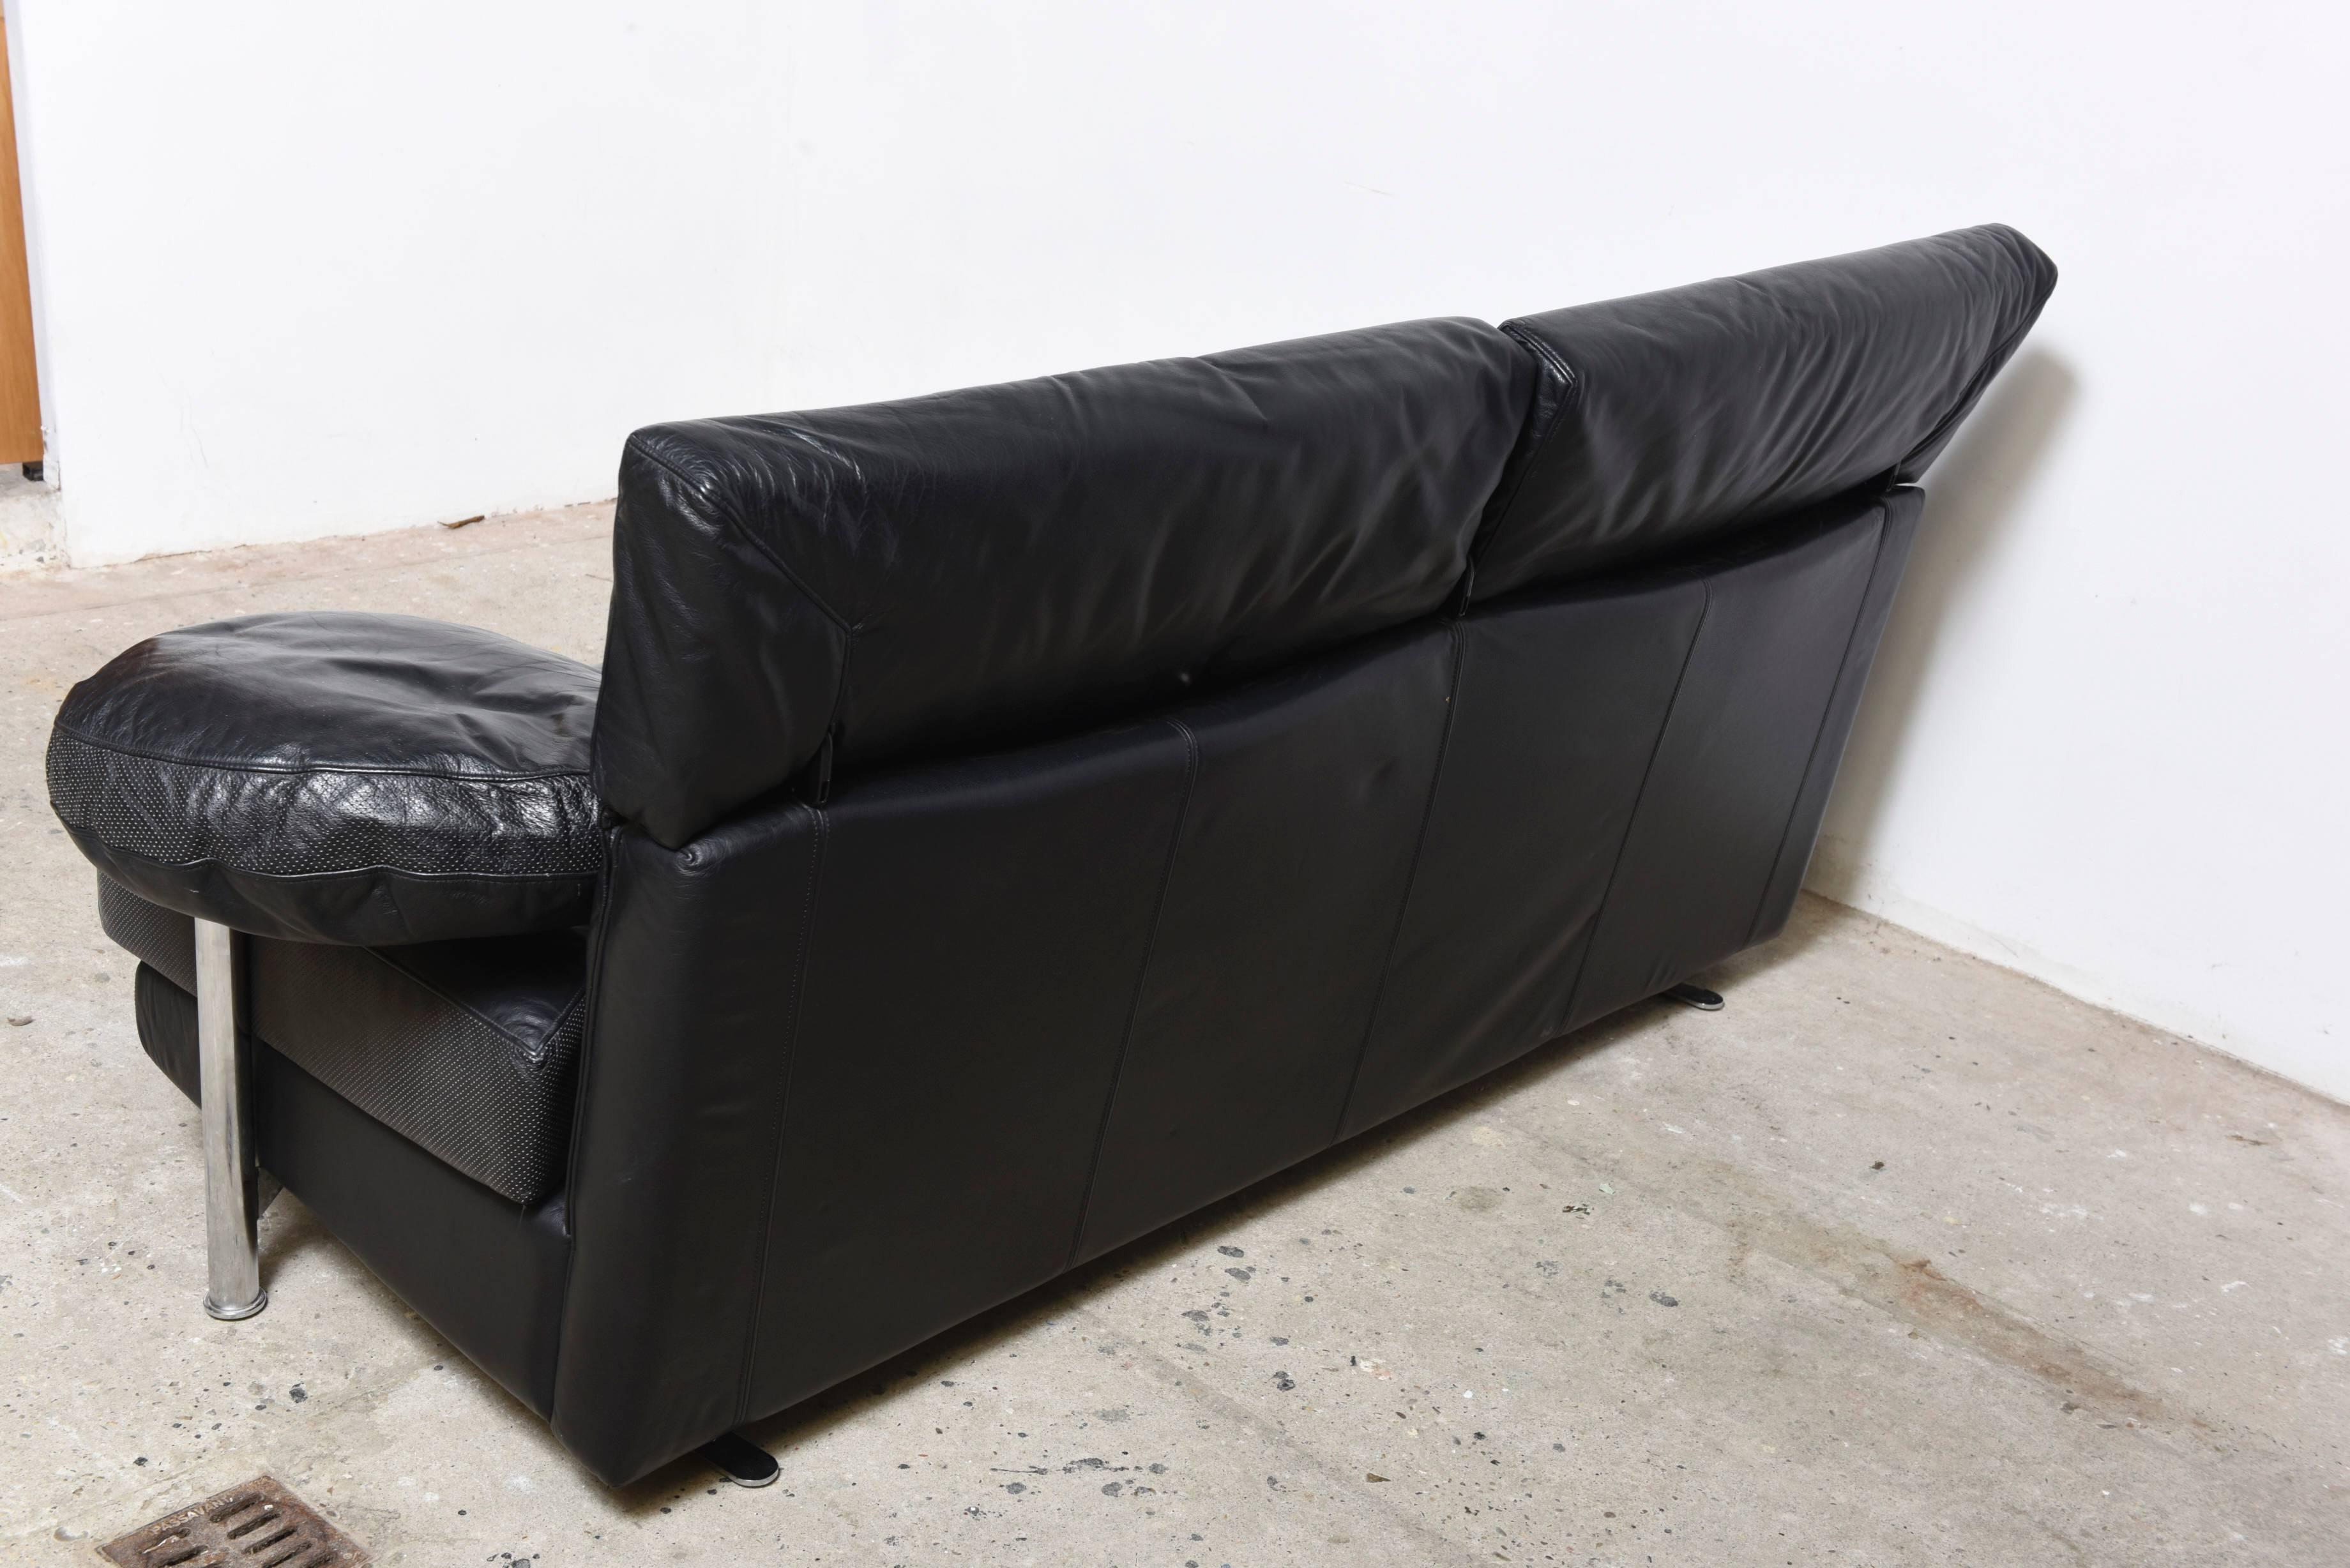 Cast Modern Two-Seat, Sofa by Paolo Piva for B & B Italia